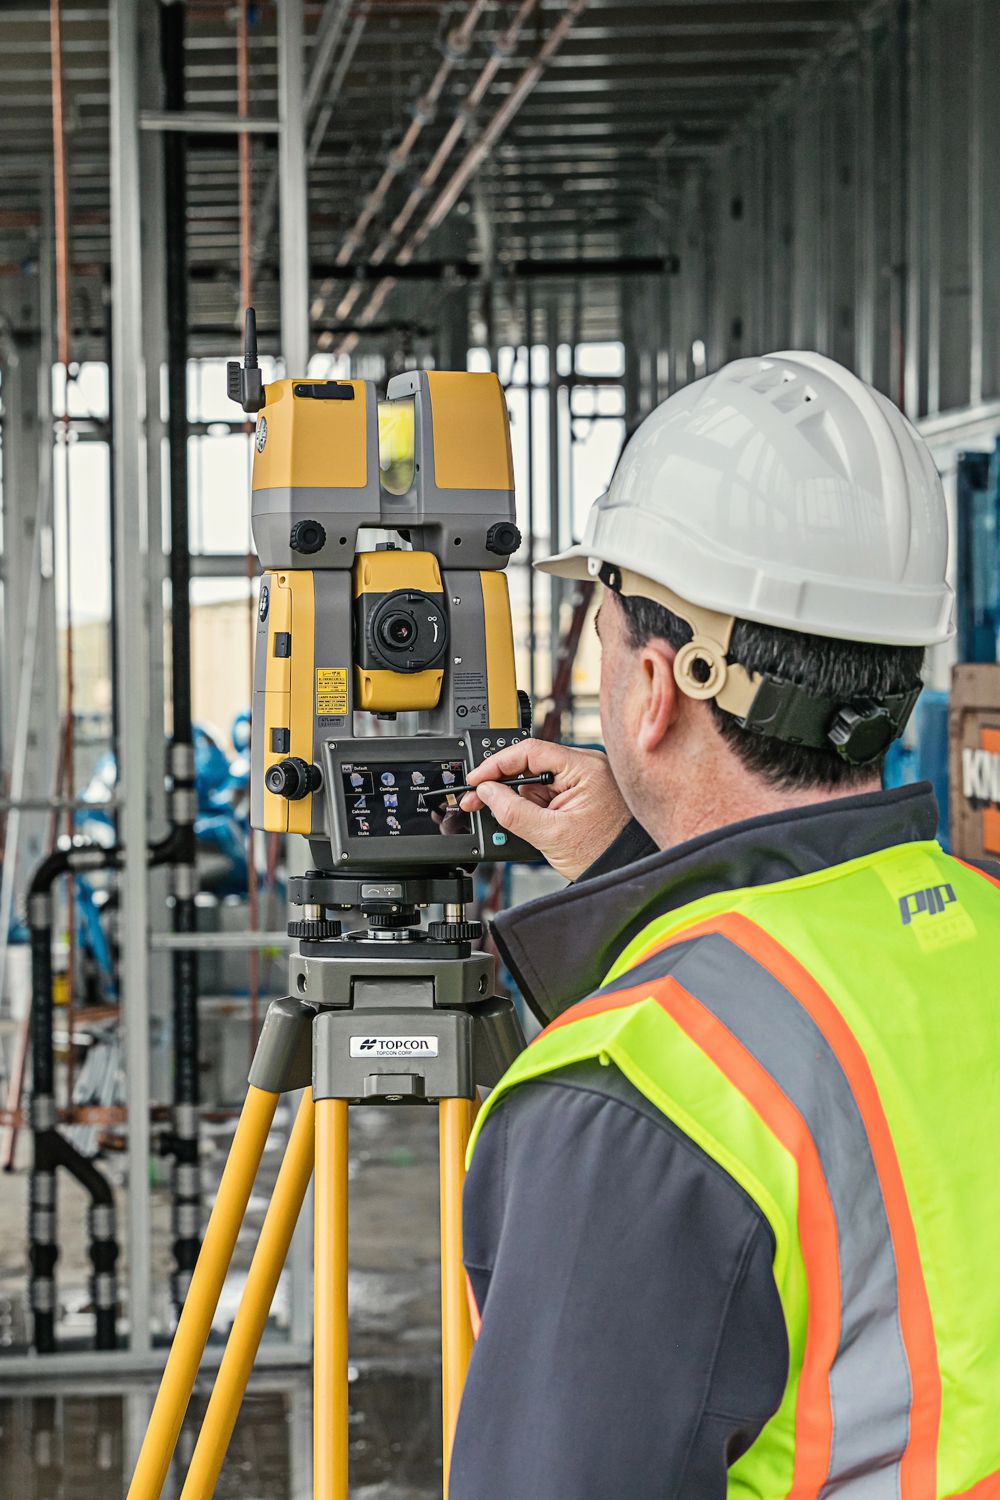 Scanning robotic total station a construction technology innovation